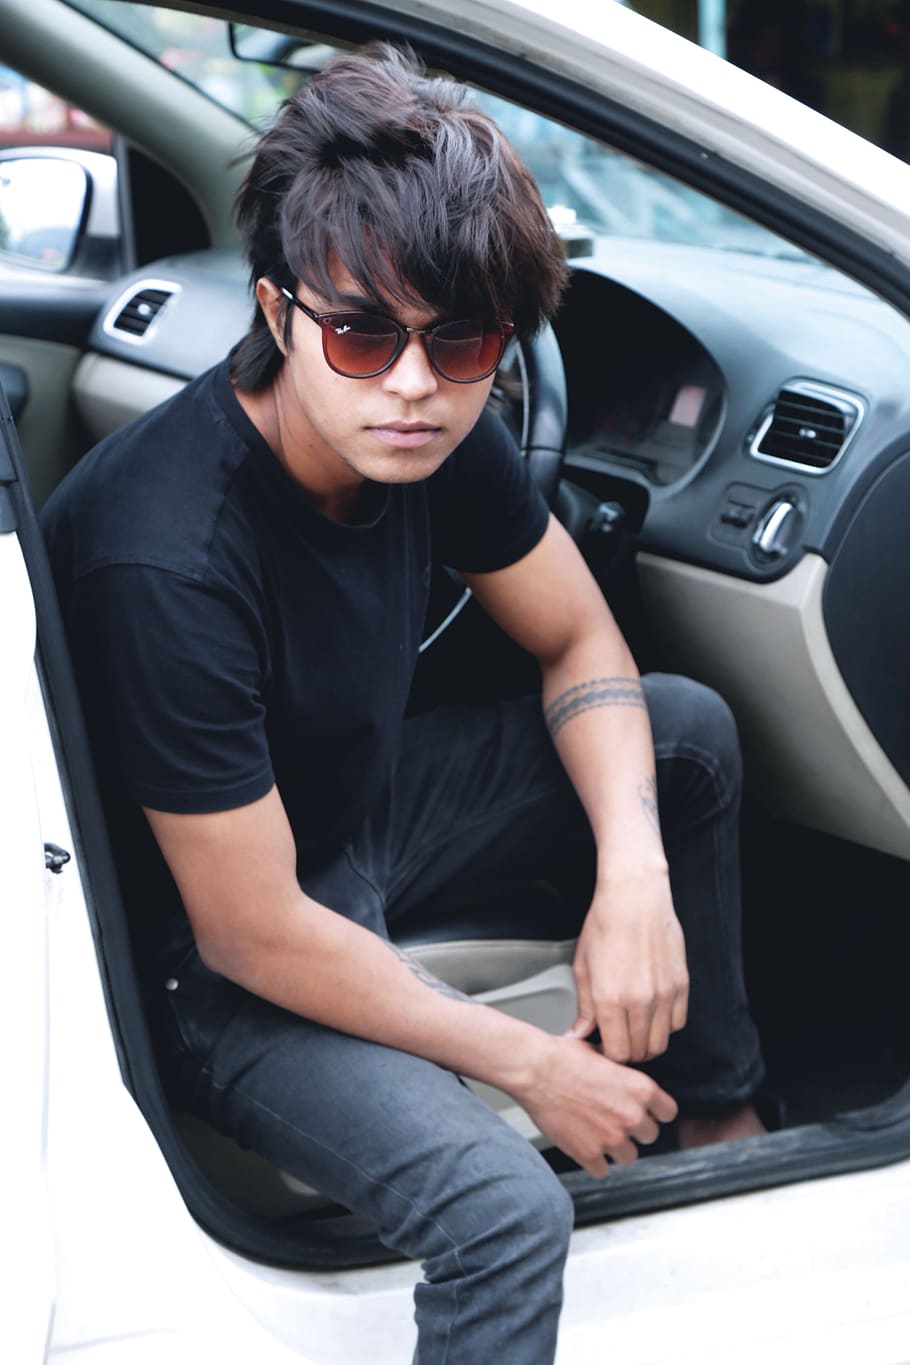 car, summer, handsome, fun, young, guy, boy, man, people, sunglasses